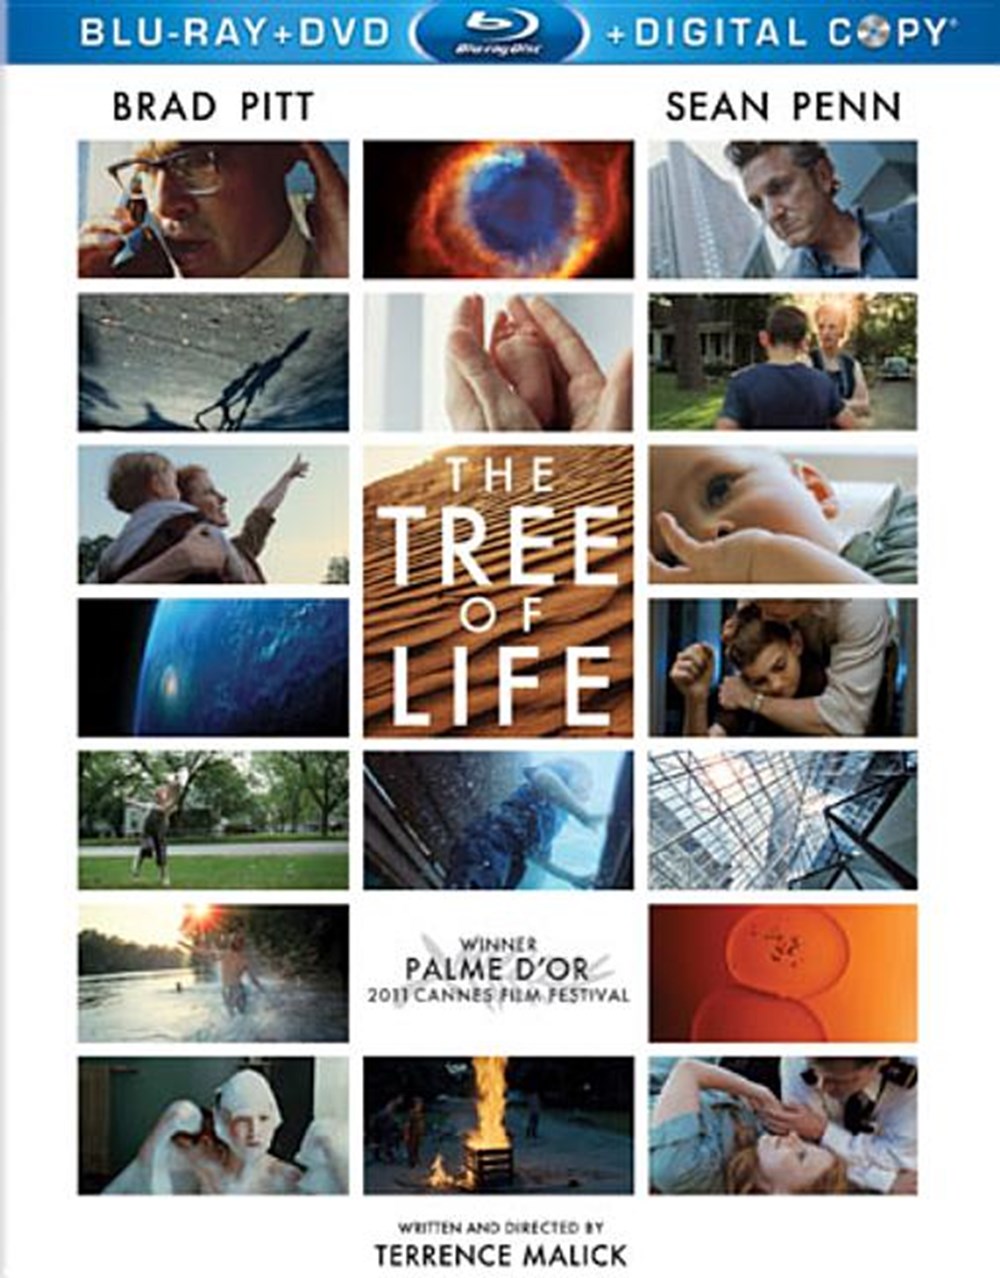 Tree of Life (DVD & Digital Copy Included)